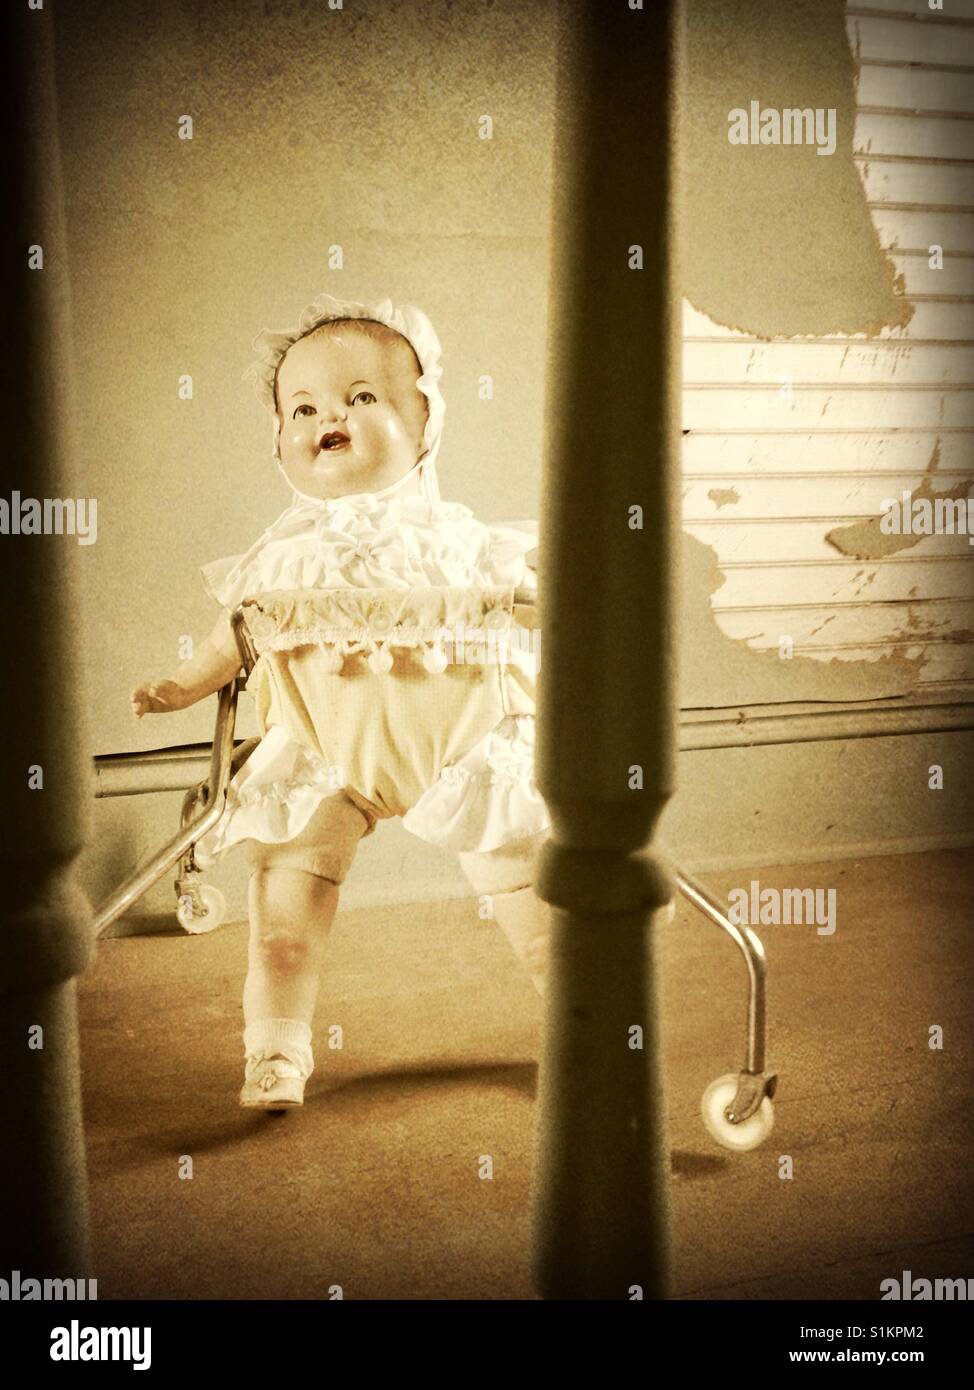 Watching Doris walk- old composition doll with ruffled bonnet and dress in vintage gingham baby walker inside old house with wooden floors, railing, bead board and green wallpaper Stock Photo